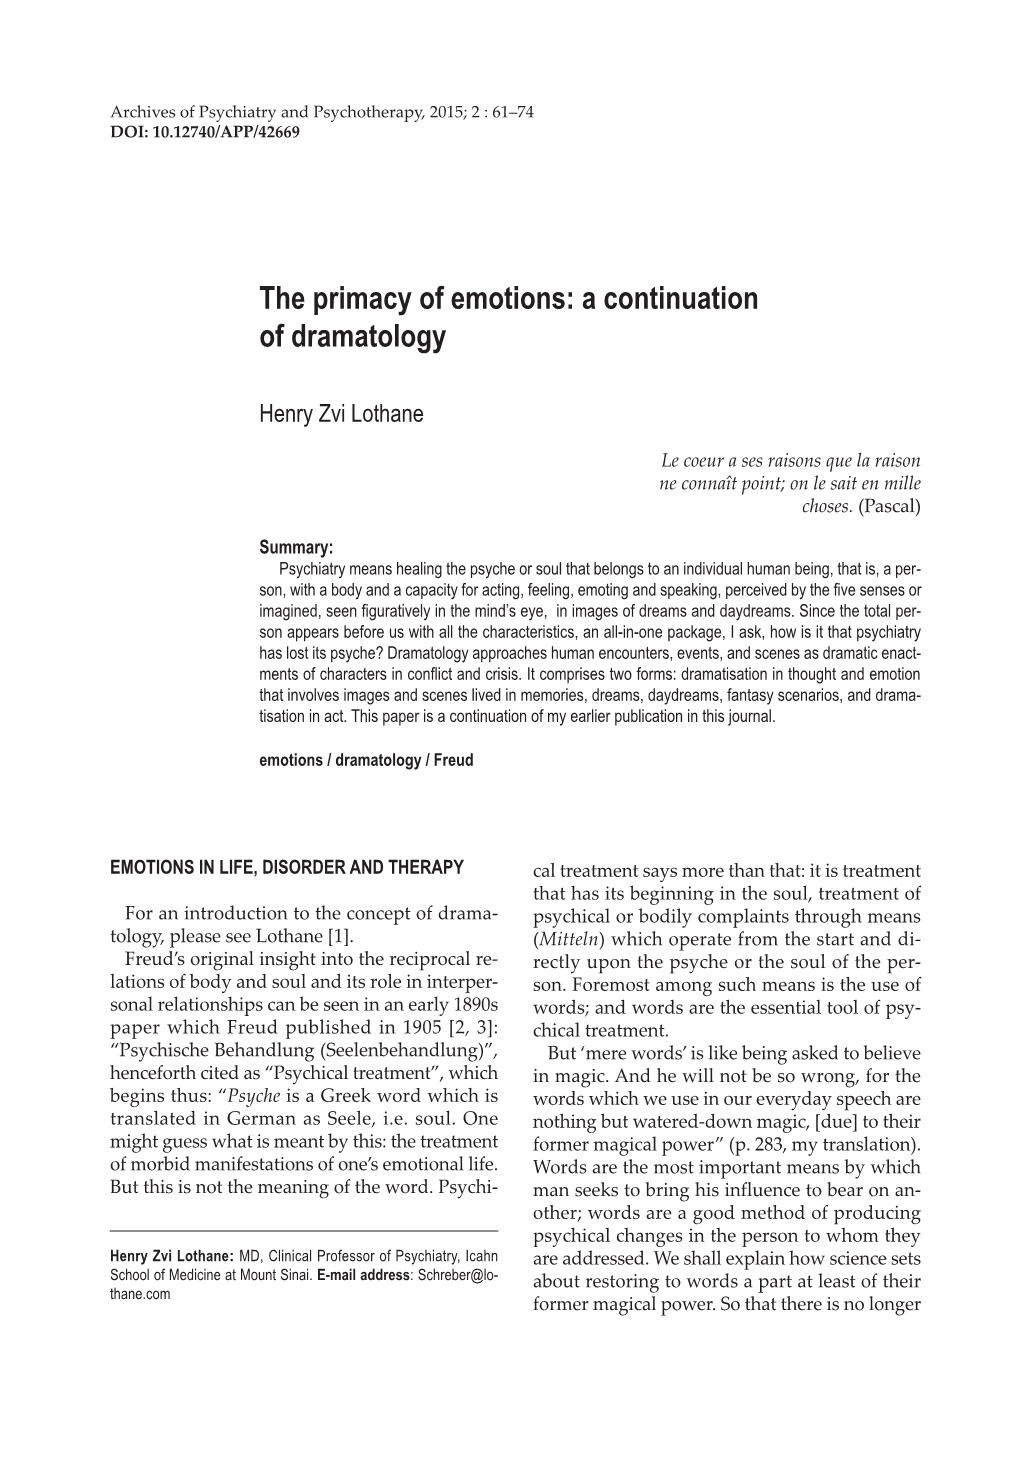 The Primacy of Emotions: a Continuation of Dramatology